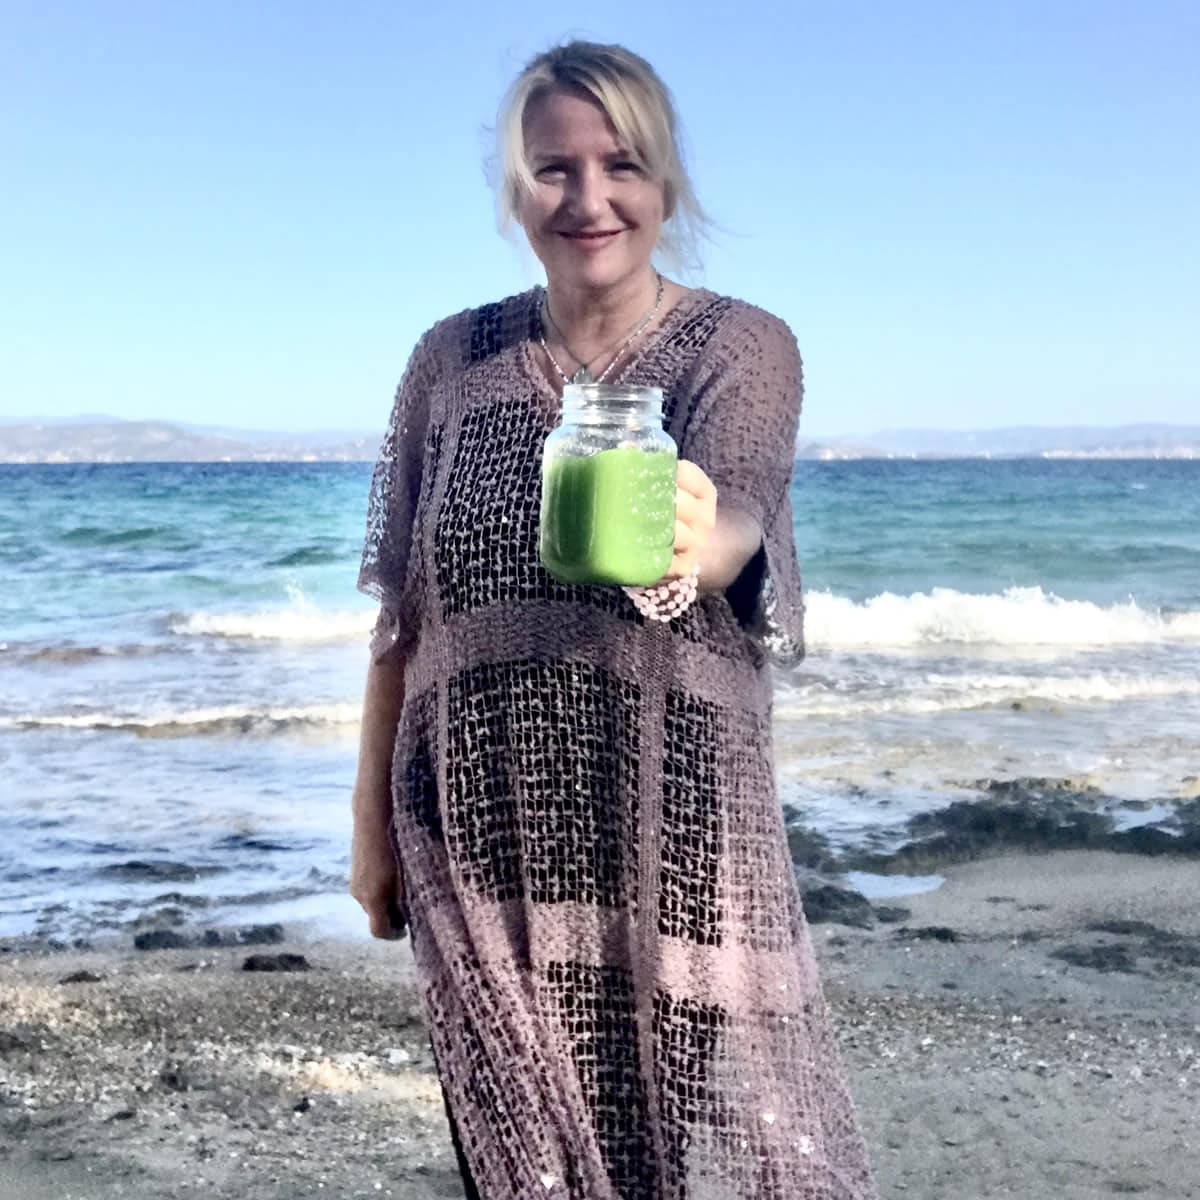 Experience the healing of celery juice